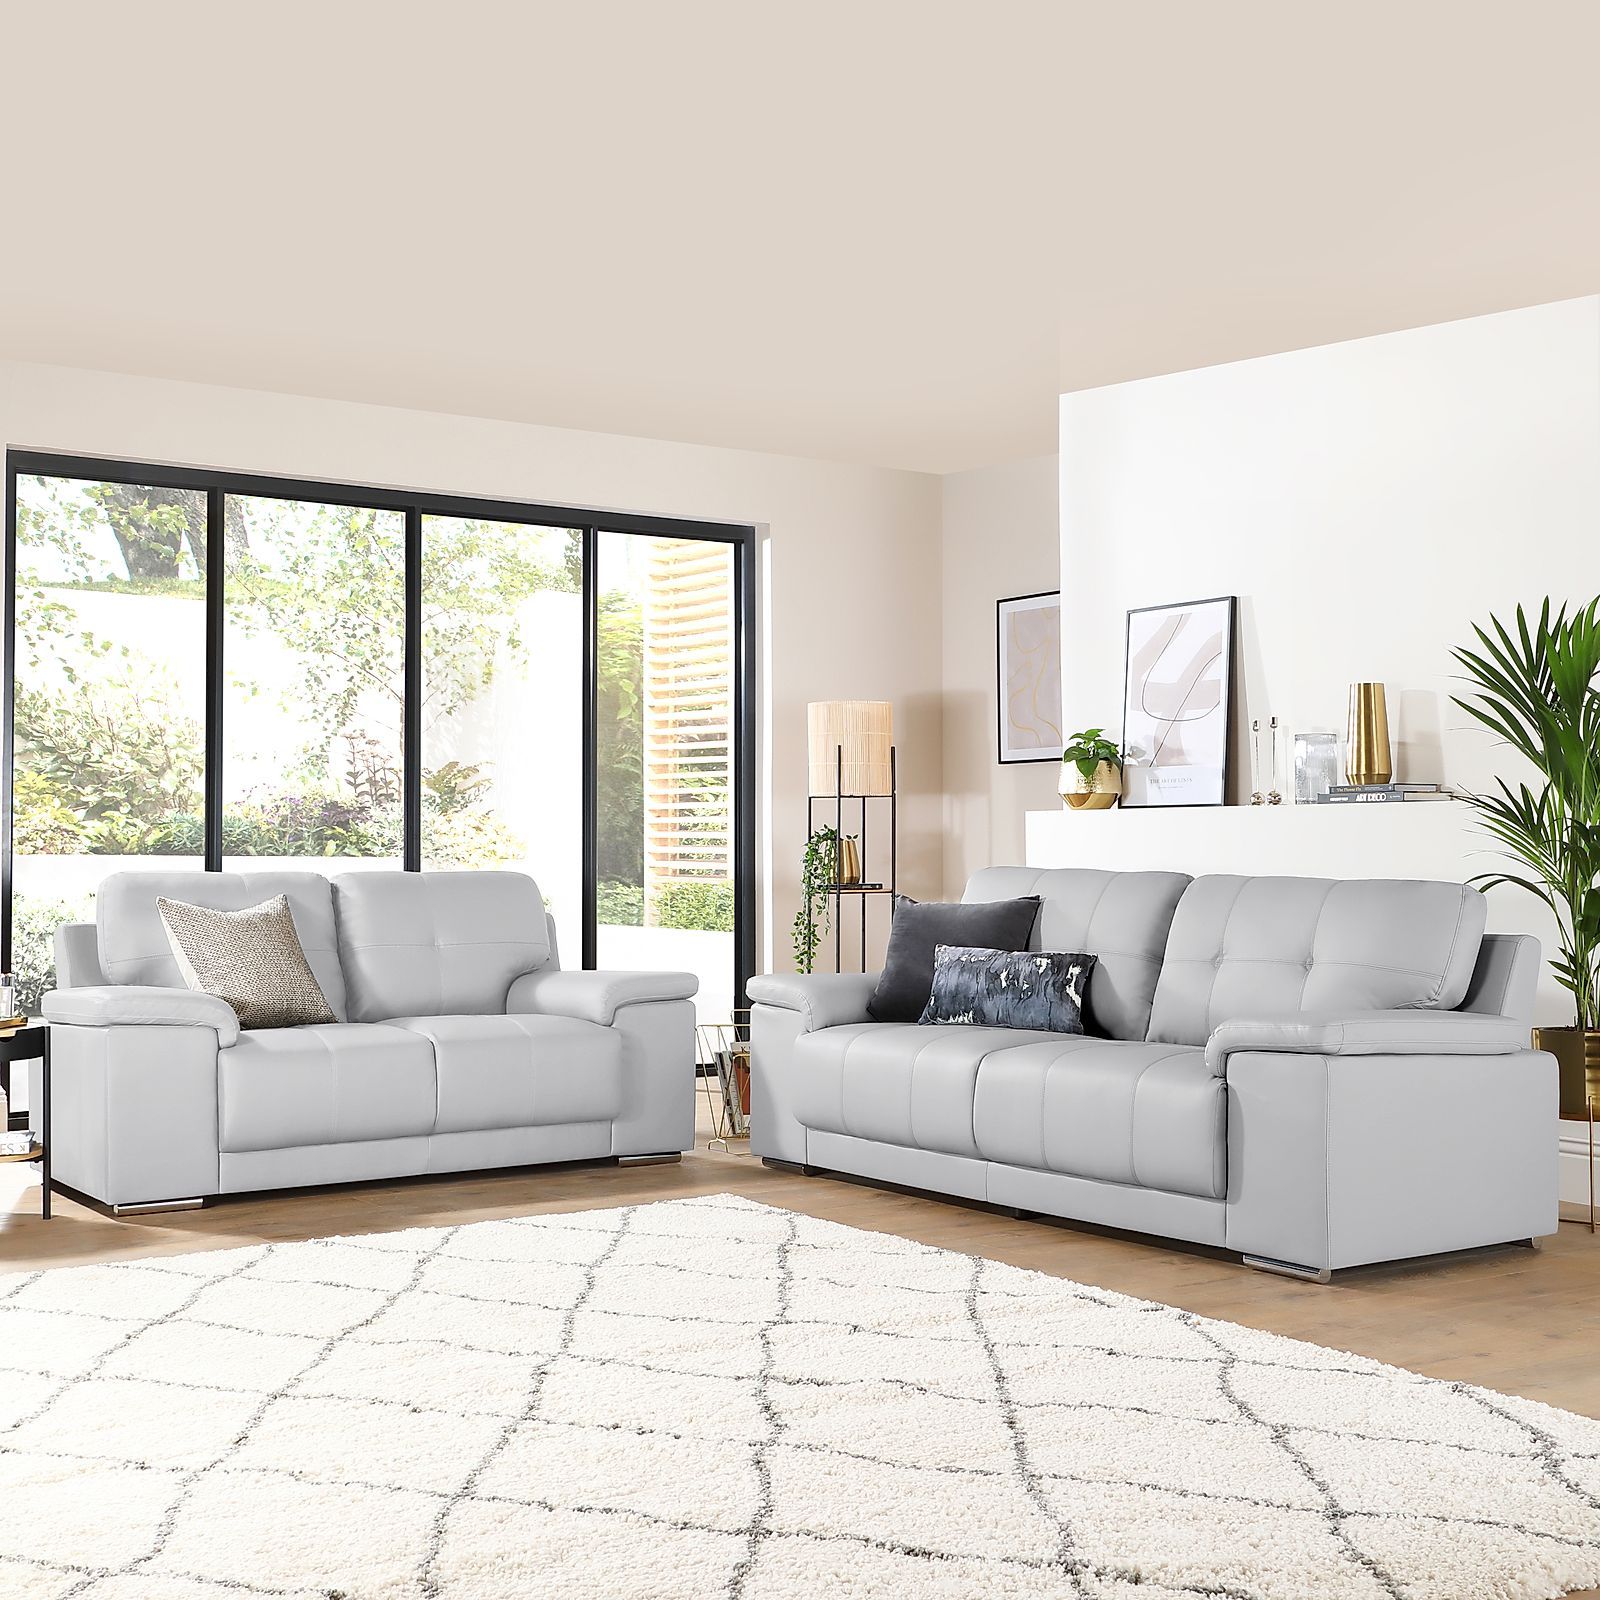 Kansas Light Grey Leather 3+2 Seater Sofa Set | Furniture Choice With Sofas In Light Grey (View 7 of 20)